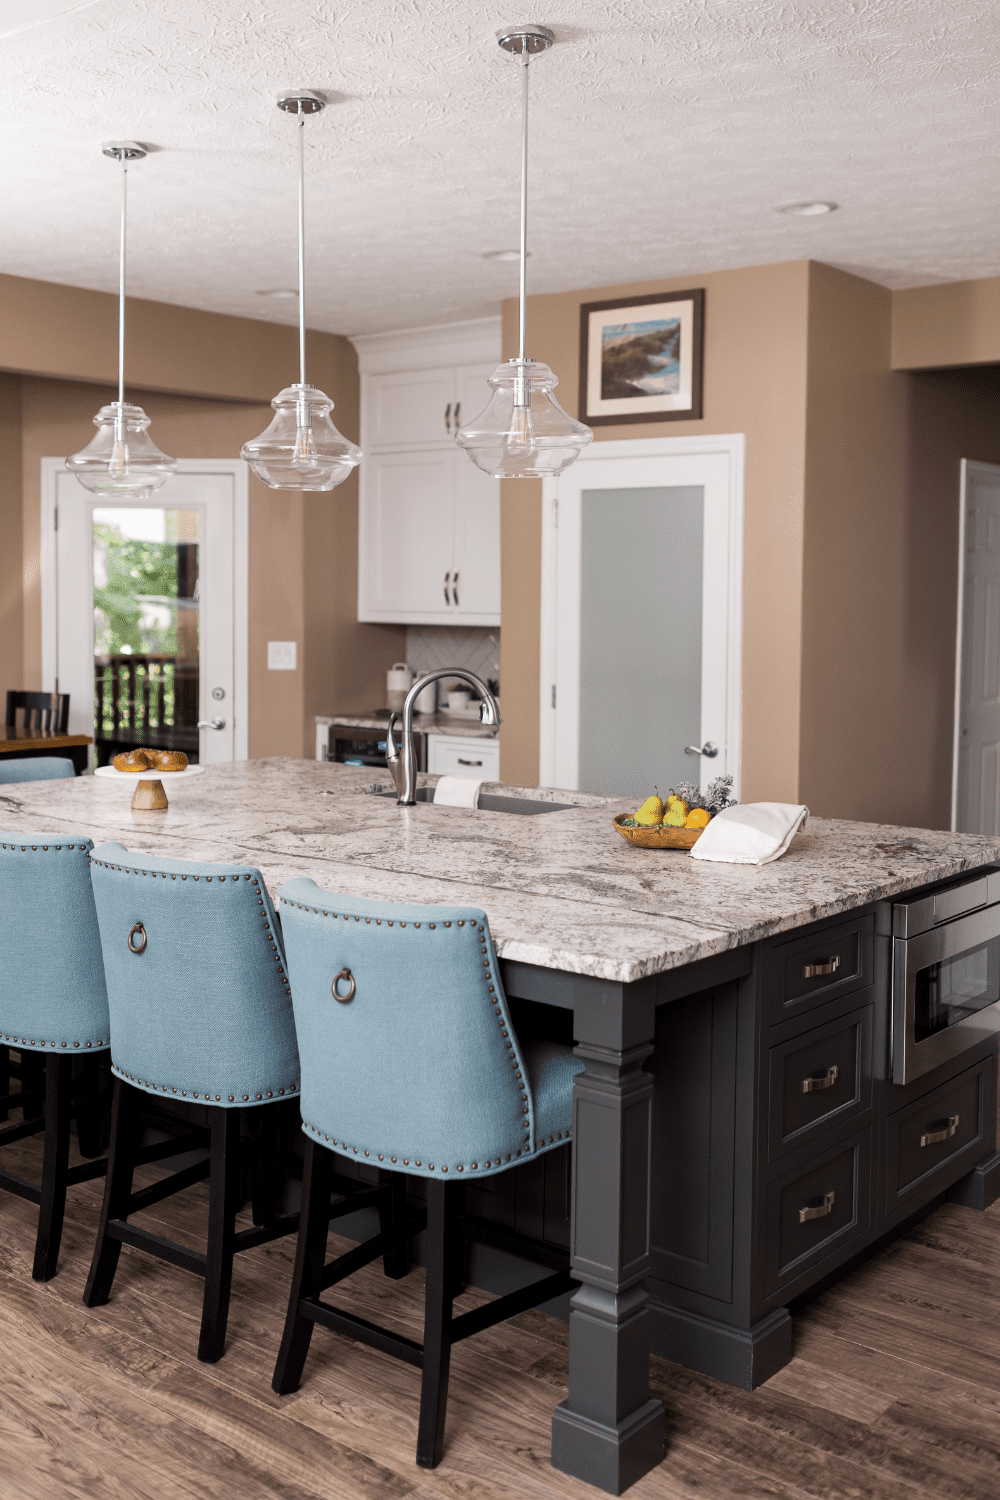 Nicholas Design Build | A versatile kitchen with a large island and blue chairs.